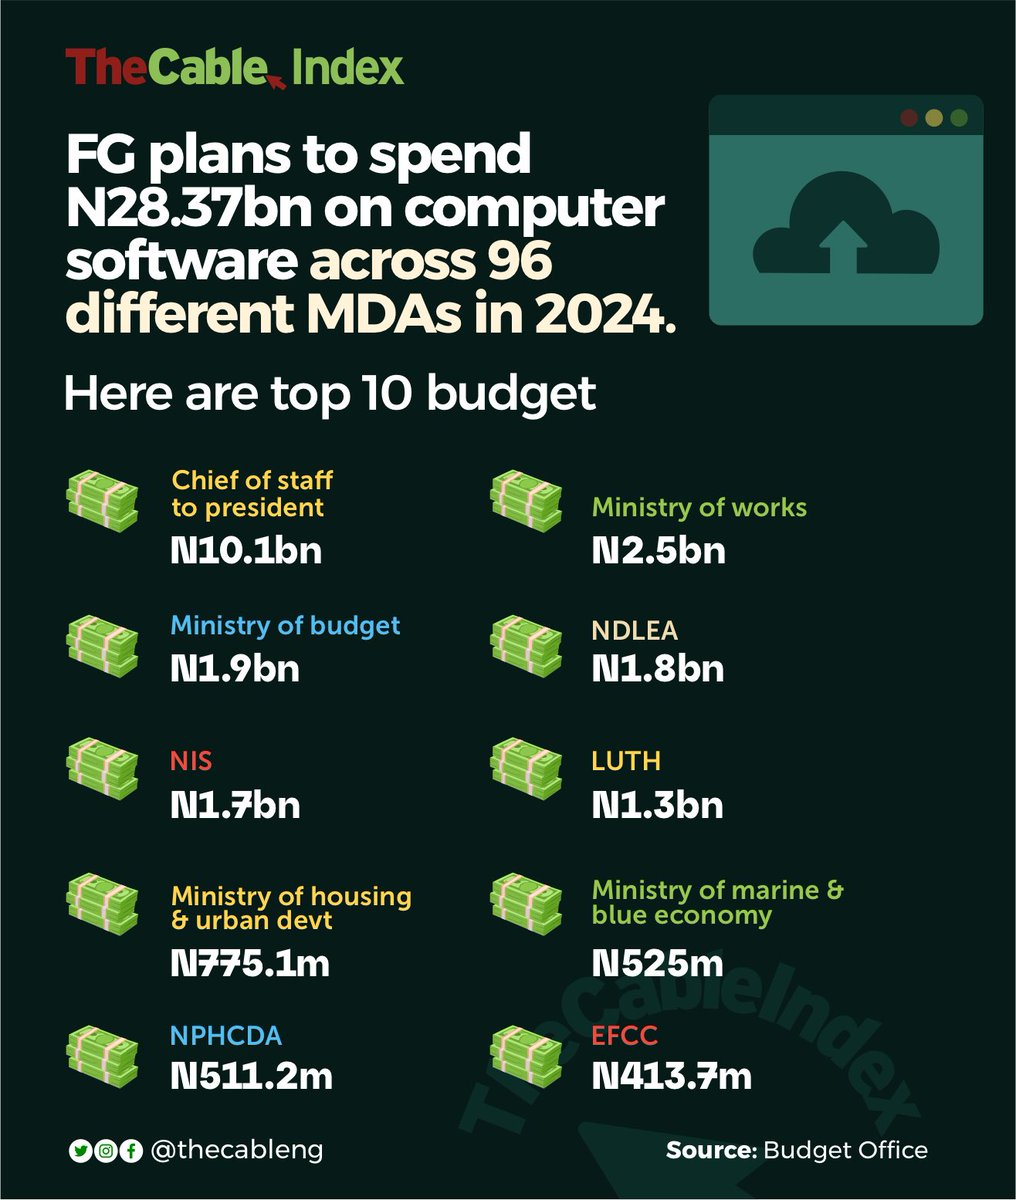 FG plans to spend N28.37bn on computer software across 96 different MDAs in 2024. Here are top 10 budget #TheCableIndex